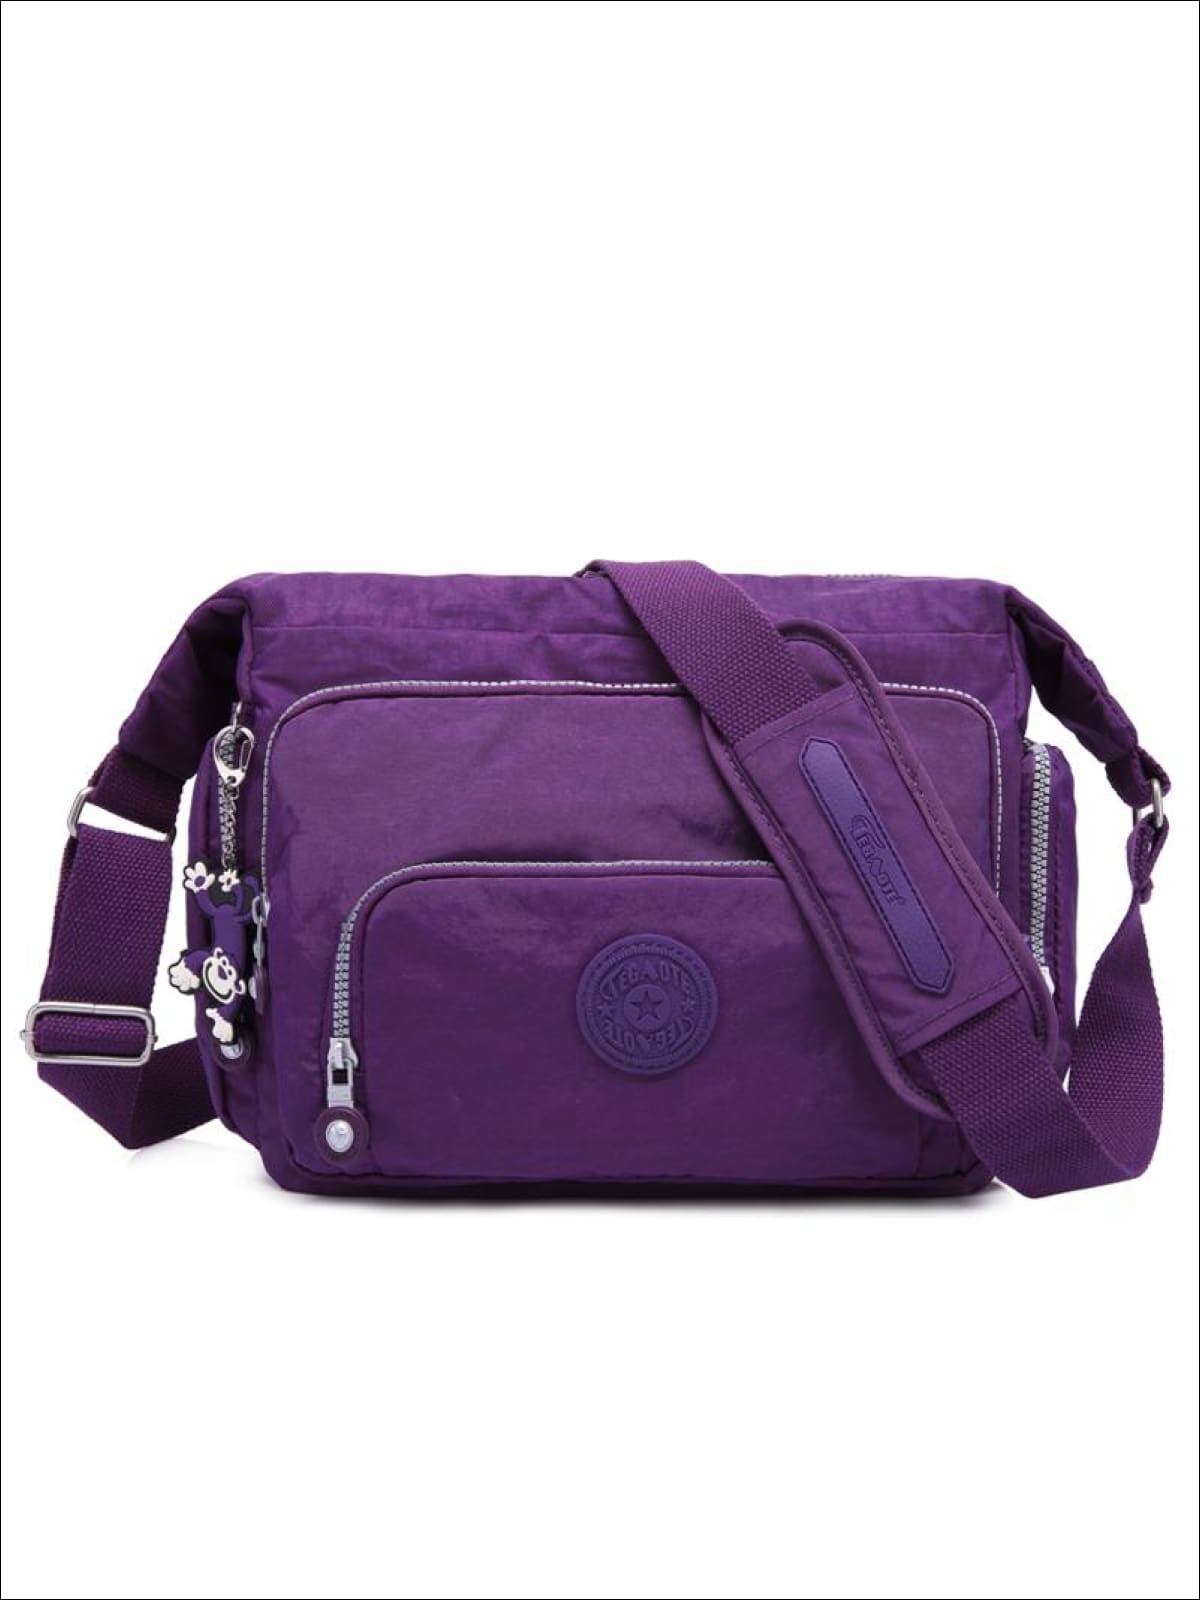 Cool messenger bags for back to school. For you and the kids.